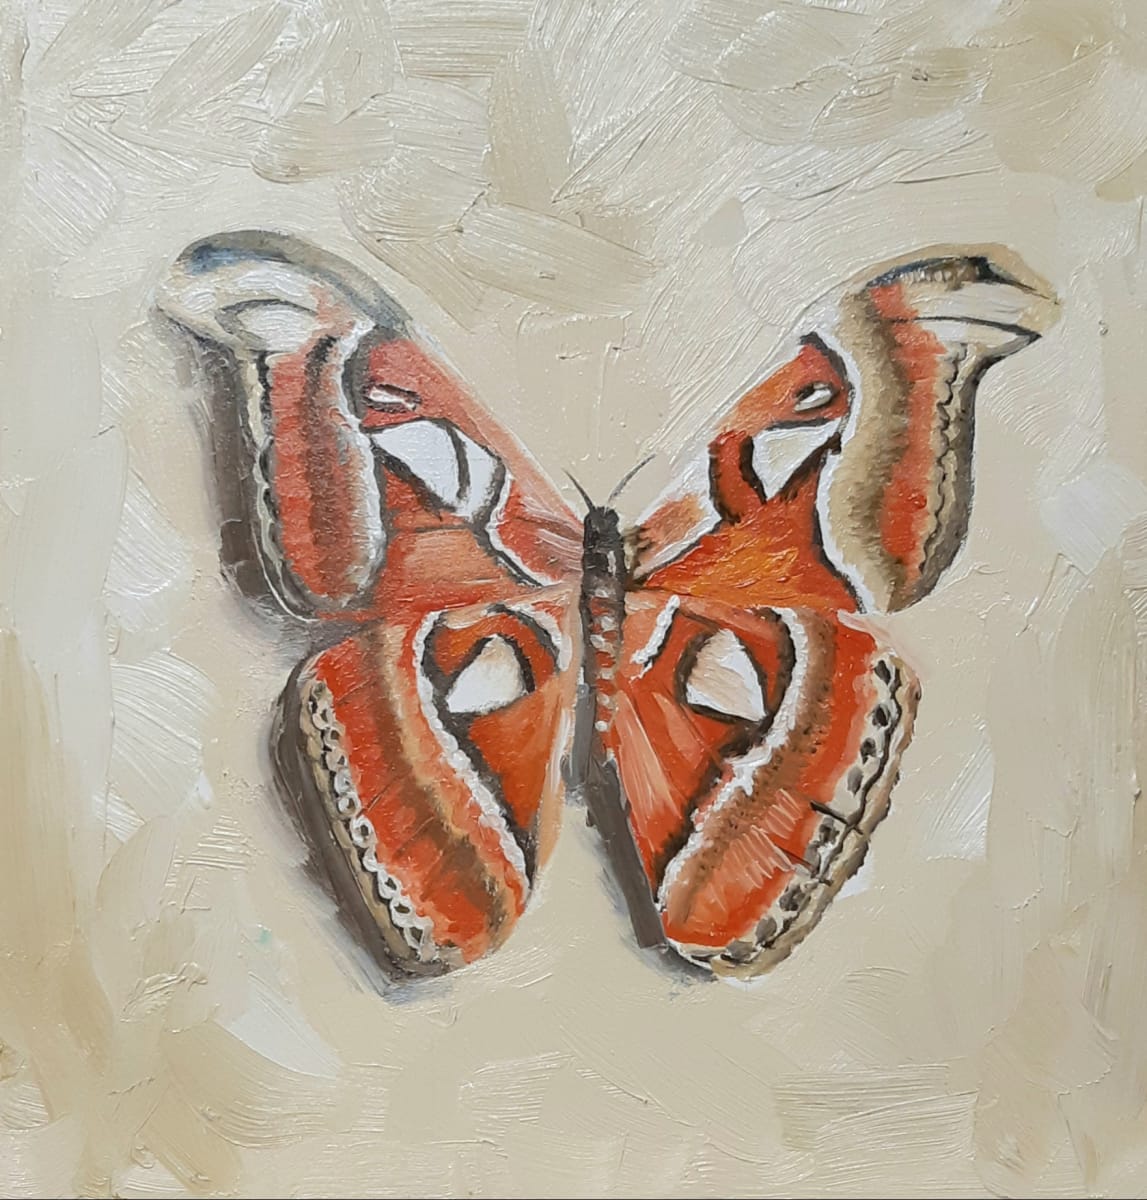 Atlas Moth by Catherine Mills  Image: Atlas Moth, oil on panel, 8 x 8 inches